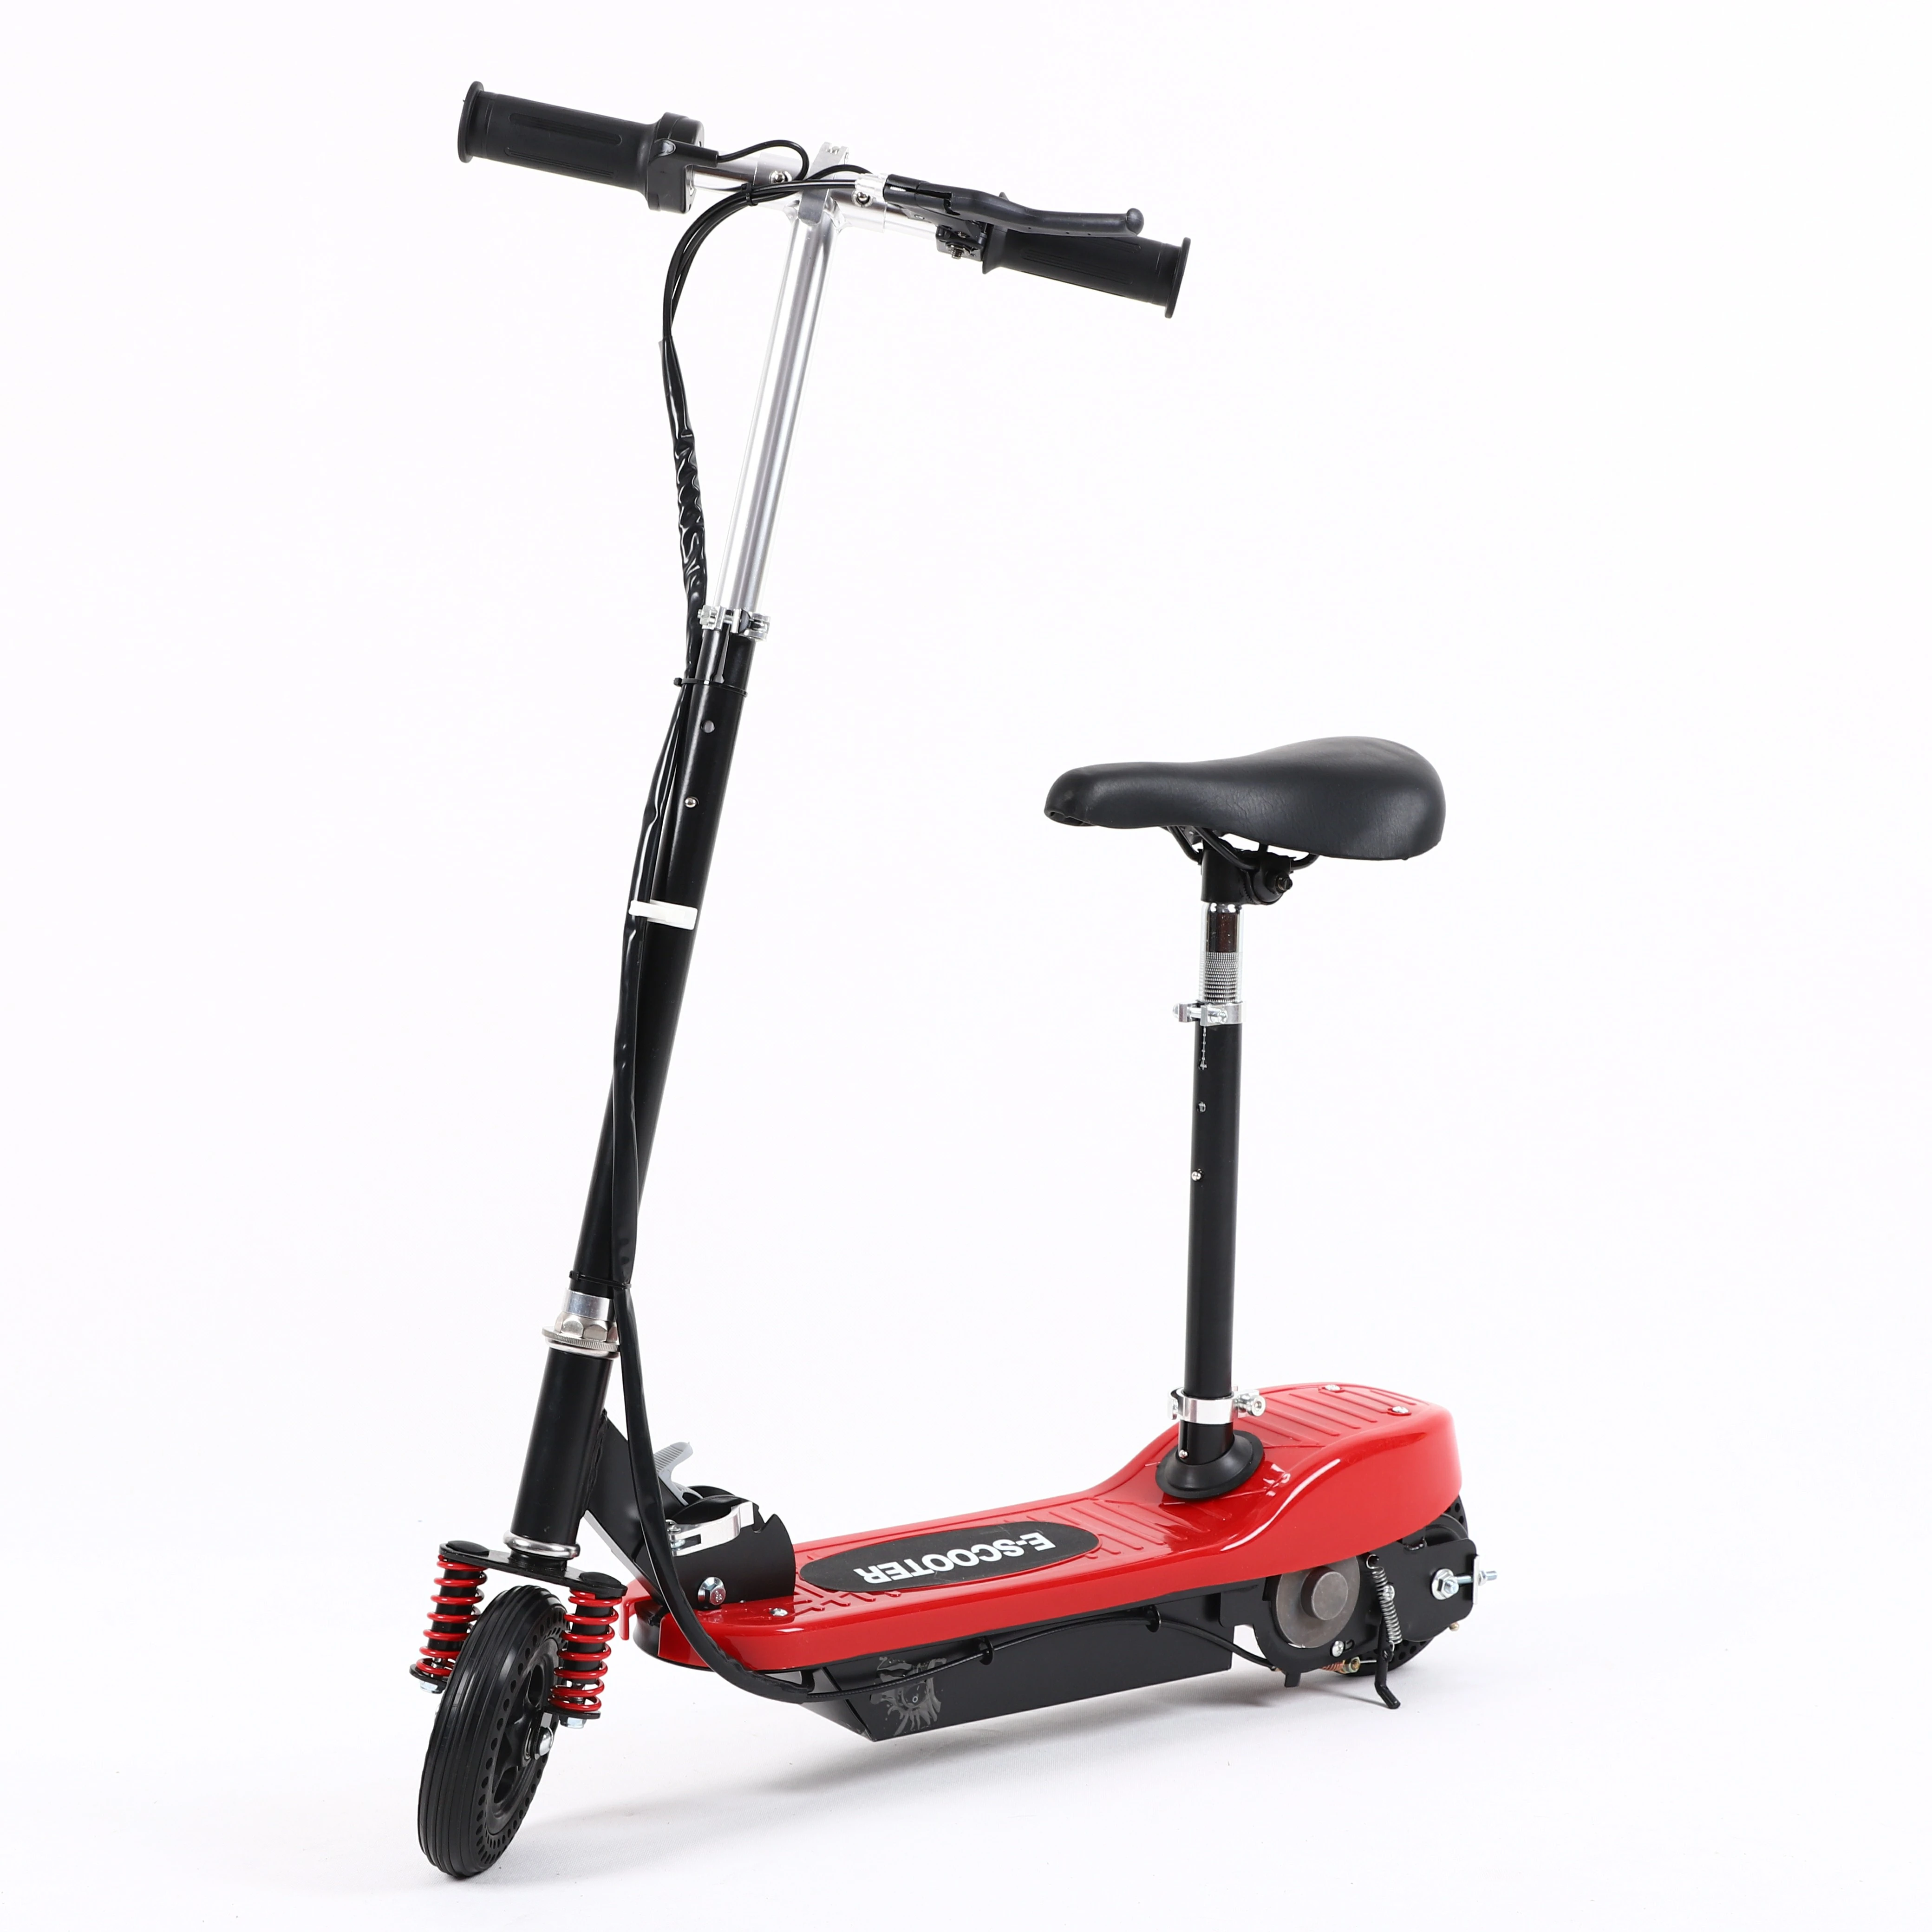 

Warehouse uk electric scooter,foldable self-blancing new electric scooters,2 wheel adult sale kick dual electric scooter